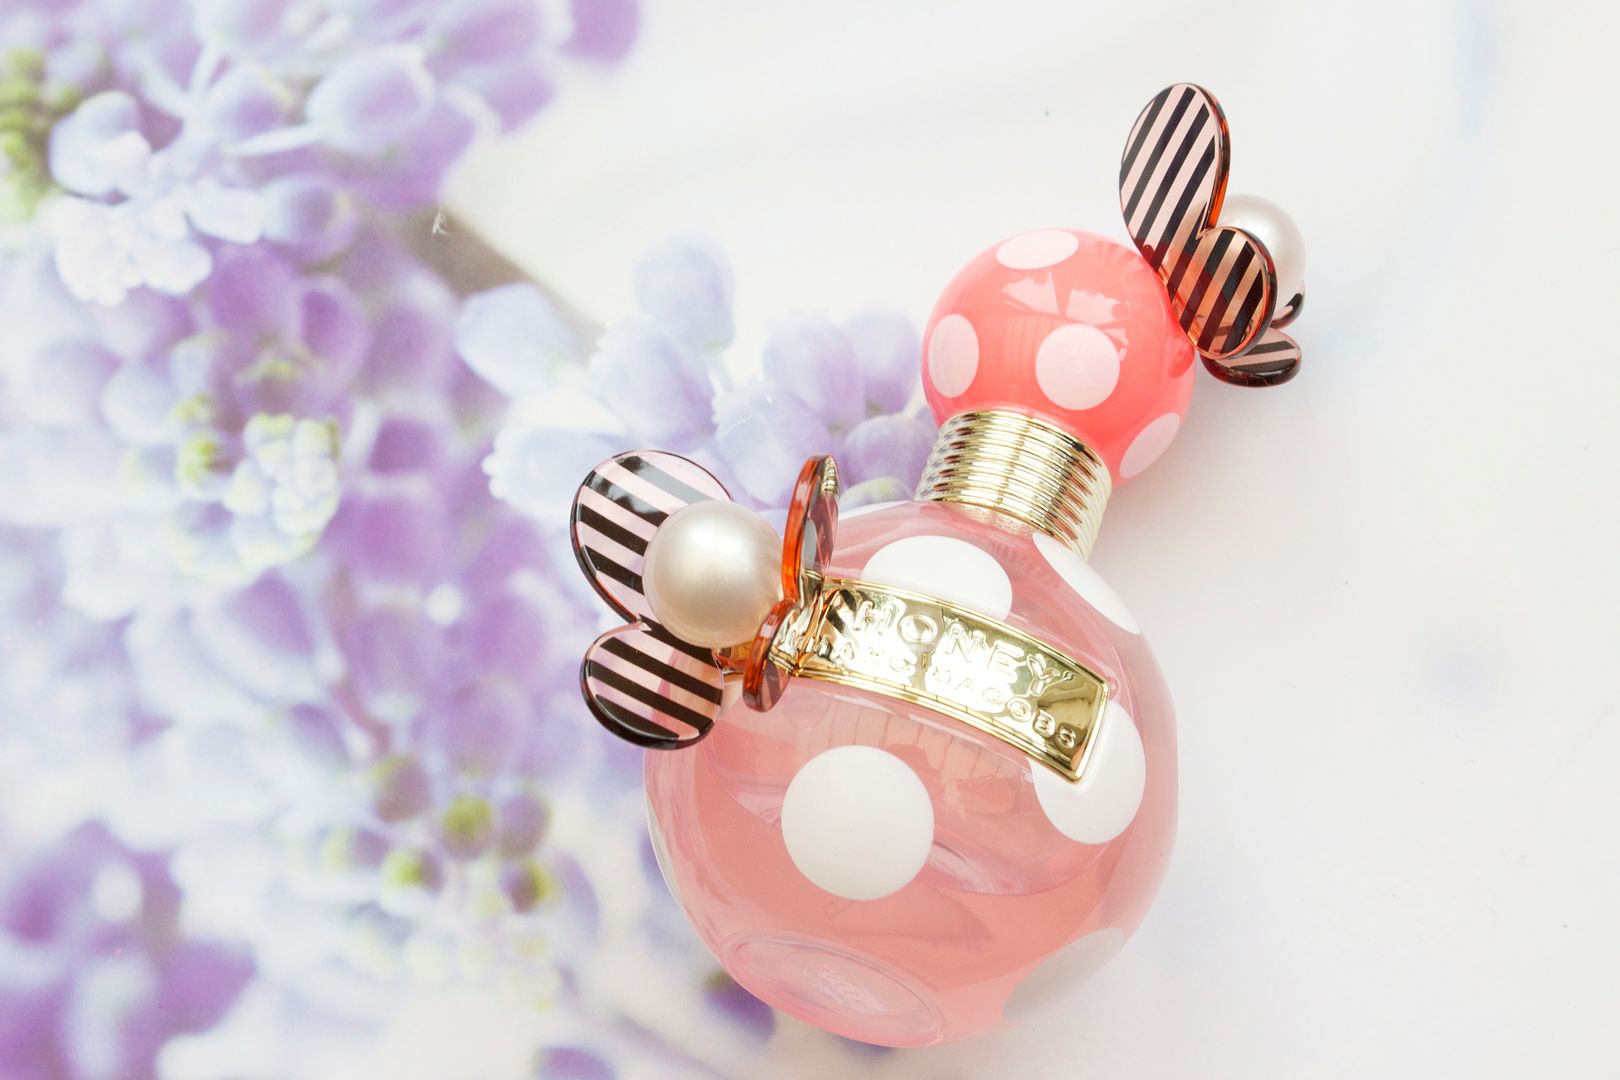 Marc Jacobs Limited Edition Pink Honey